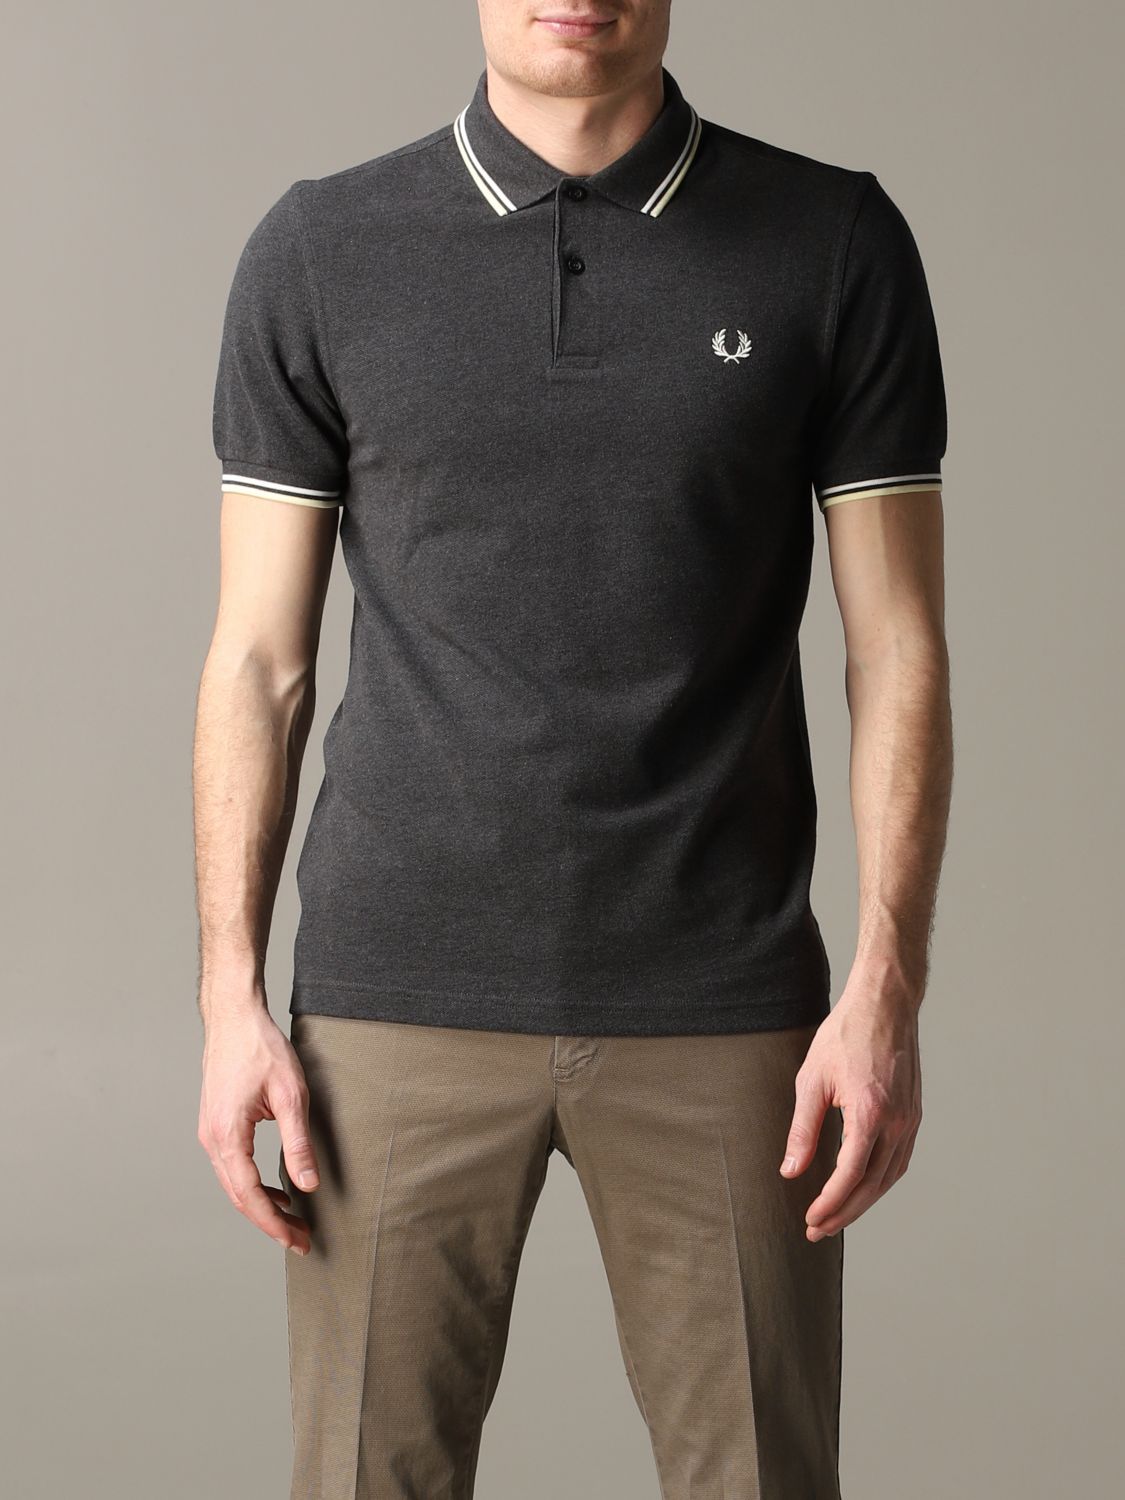 Fred Perry Outlet: polo shirt for man - Charcoal | Fred Perry polo ...